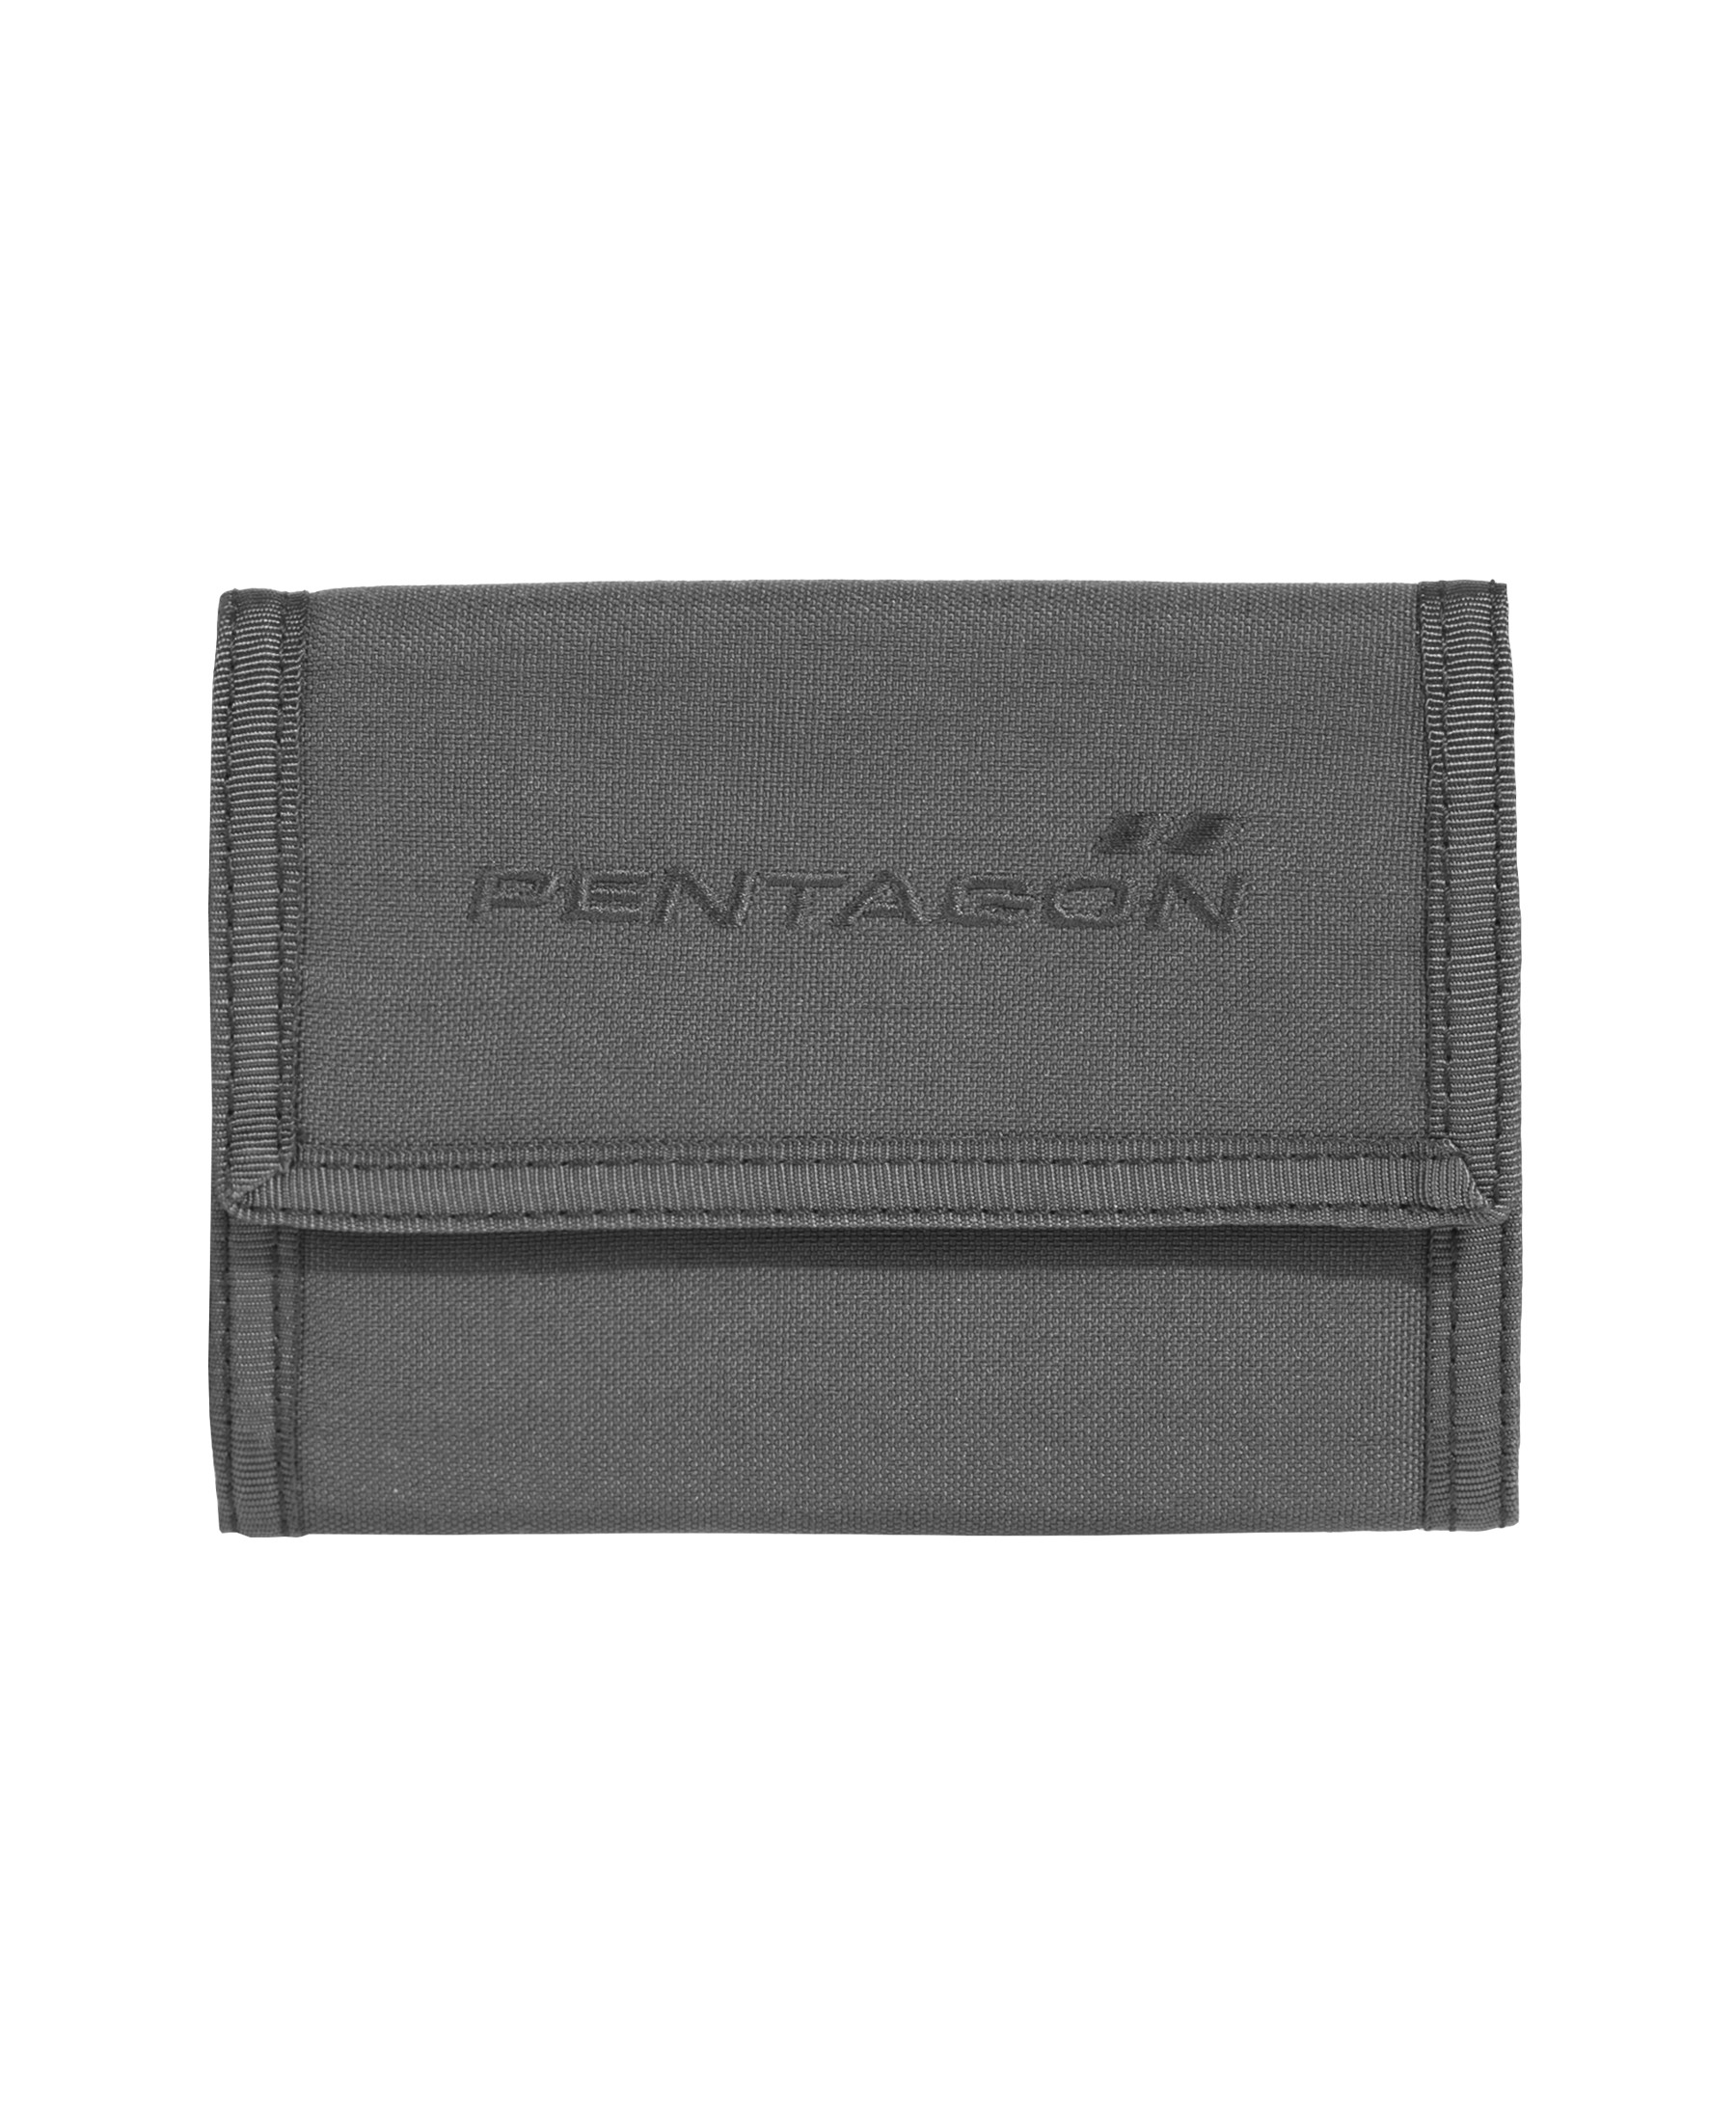 Stater 2.0 Wallet